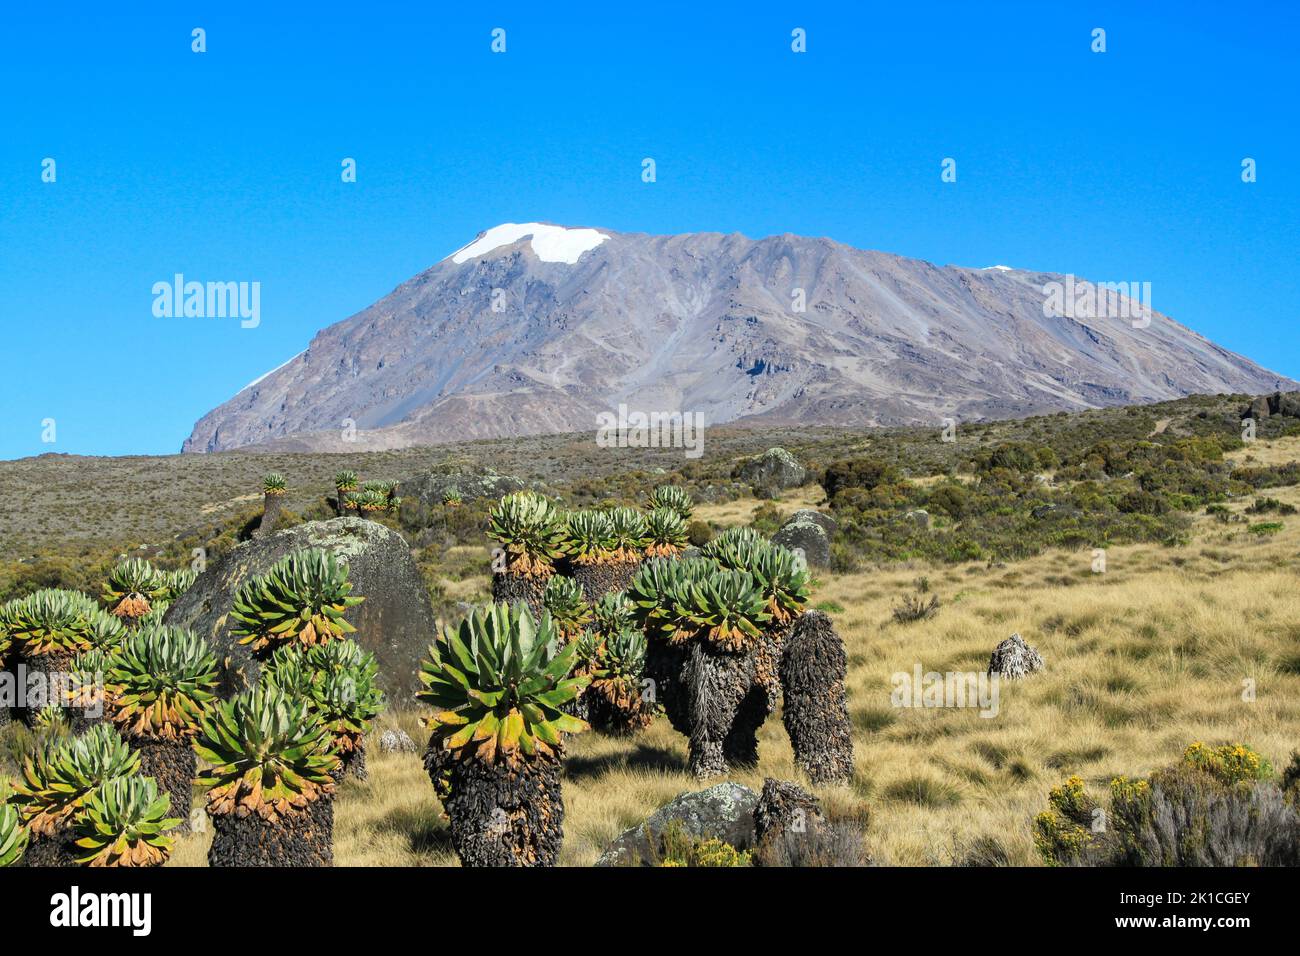 Mount Kilimanjaro, highest mountain on the Afrikan continent, 5895 meters above sea level. Stock Photo